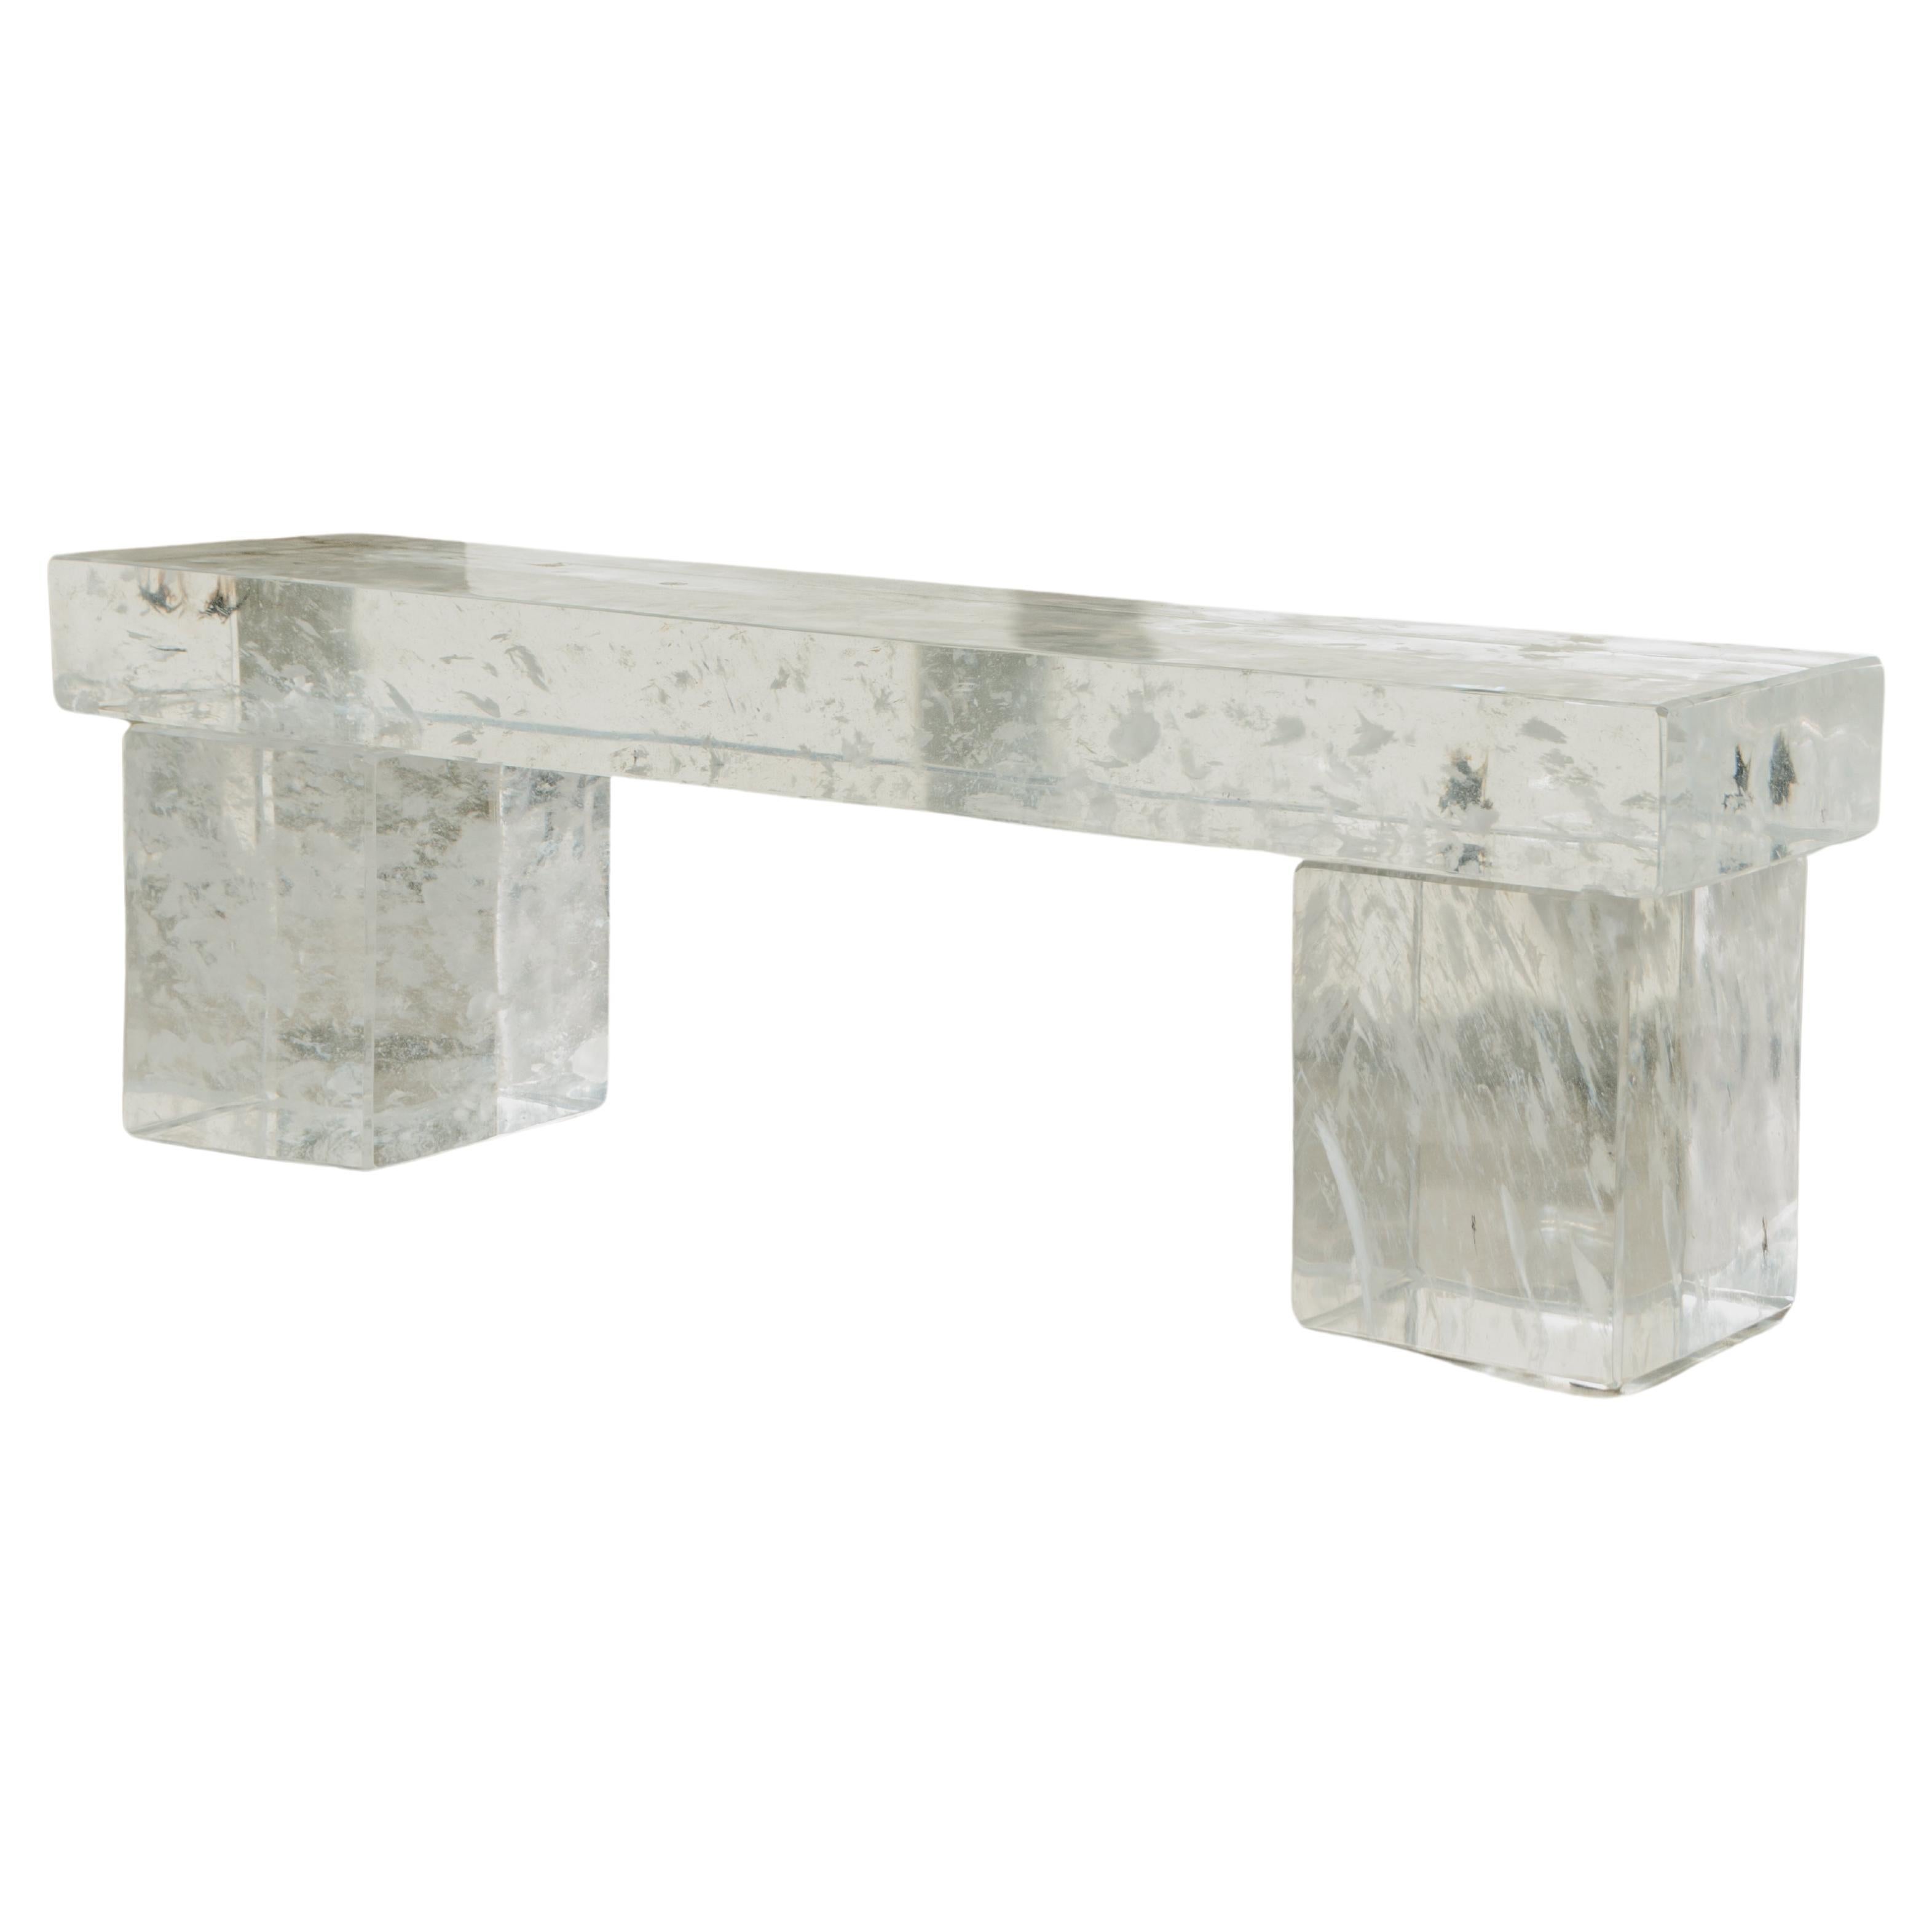 Contemporary Crystal Bench by Robert Kuo, Limited Edition For Sale